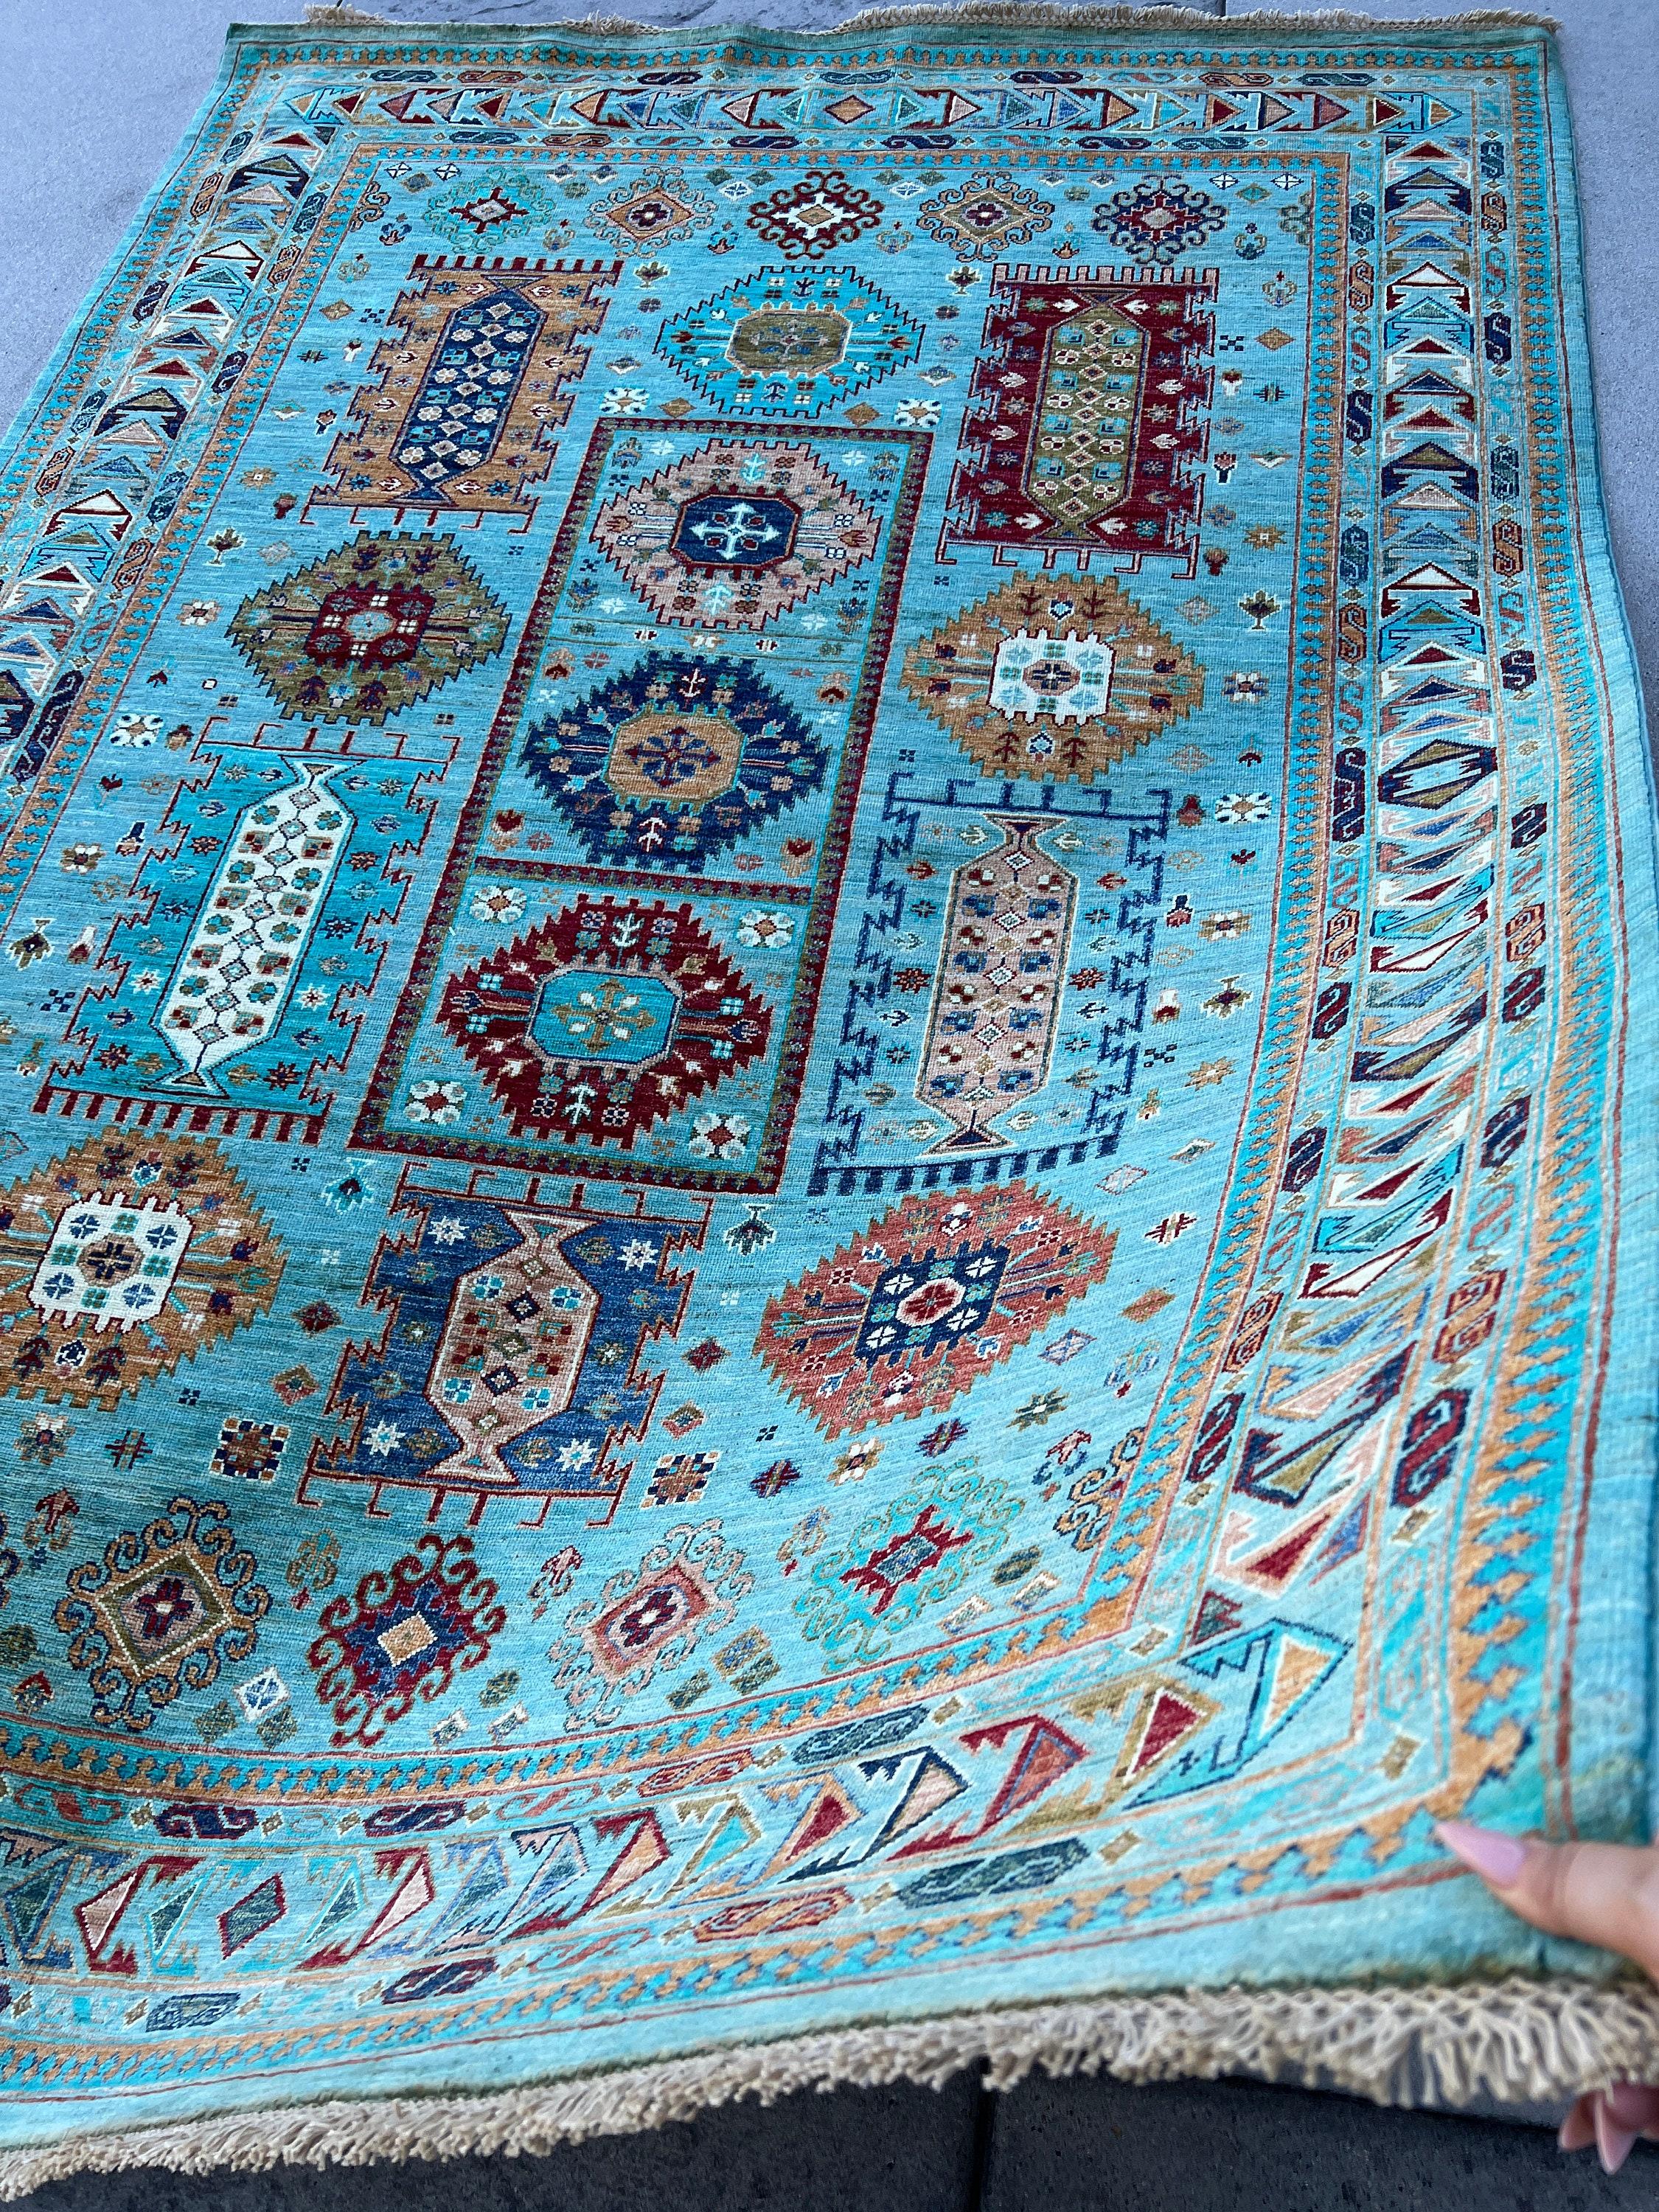 7x8 Hand-Knotted Afghan Rug Premium Hand-Spun Afghan Wool Fair Trade Turquoise  For Sale 1